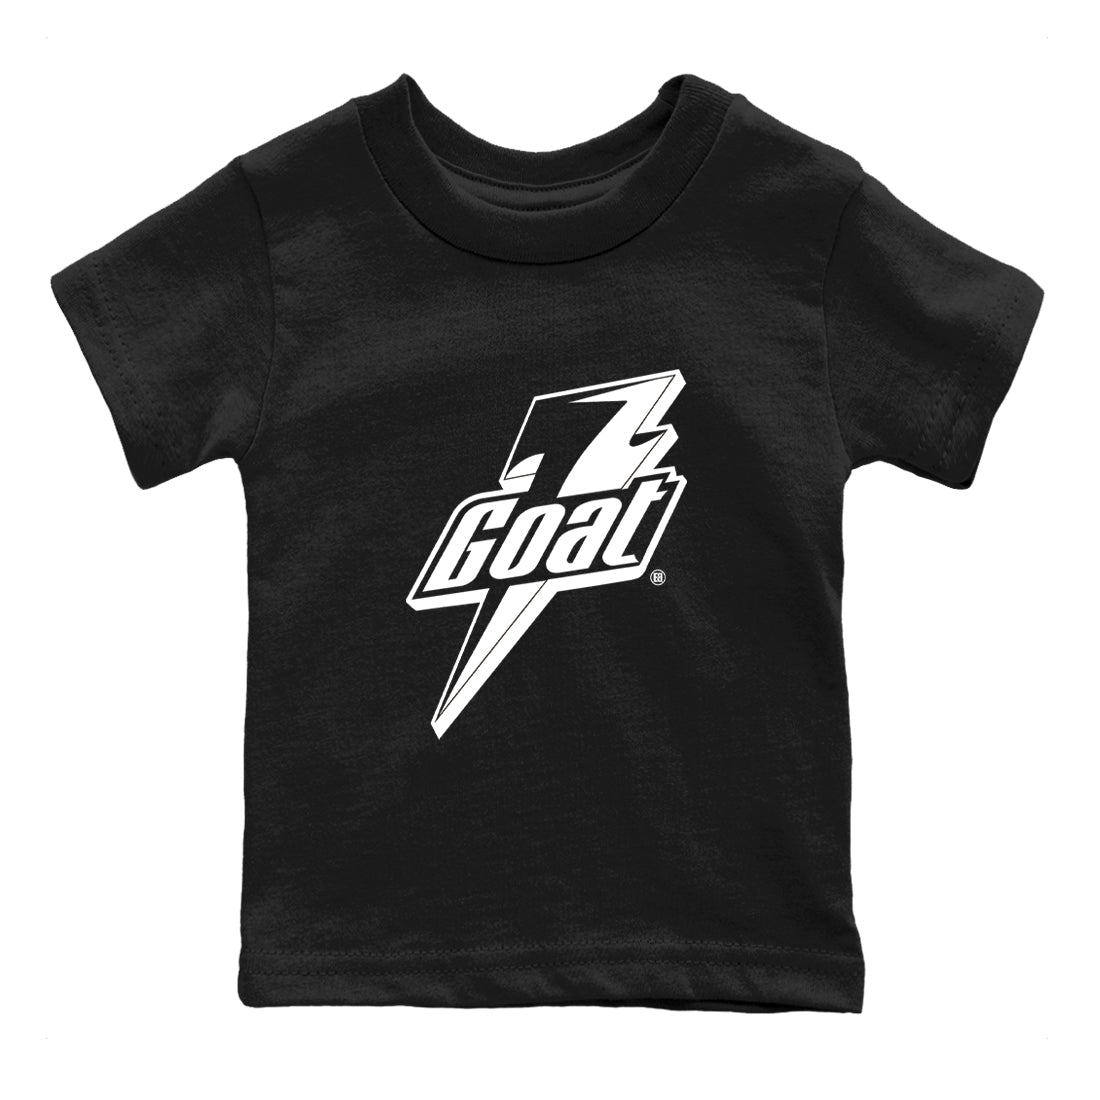 4s White Thunder shirts to match jordans Goat sneaker match tees Air Jordan 4 Retro White Thunder SNRT Sneaker Tees streetwear brand Baby and Youth Black 2 cotton tee